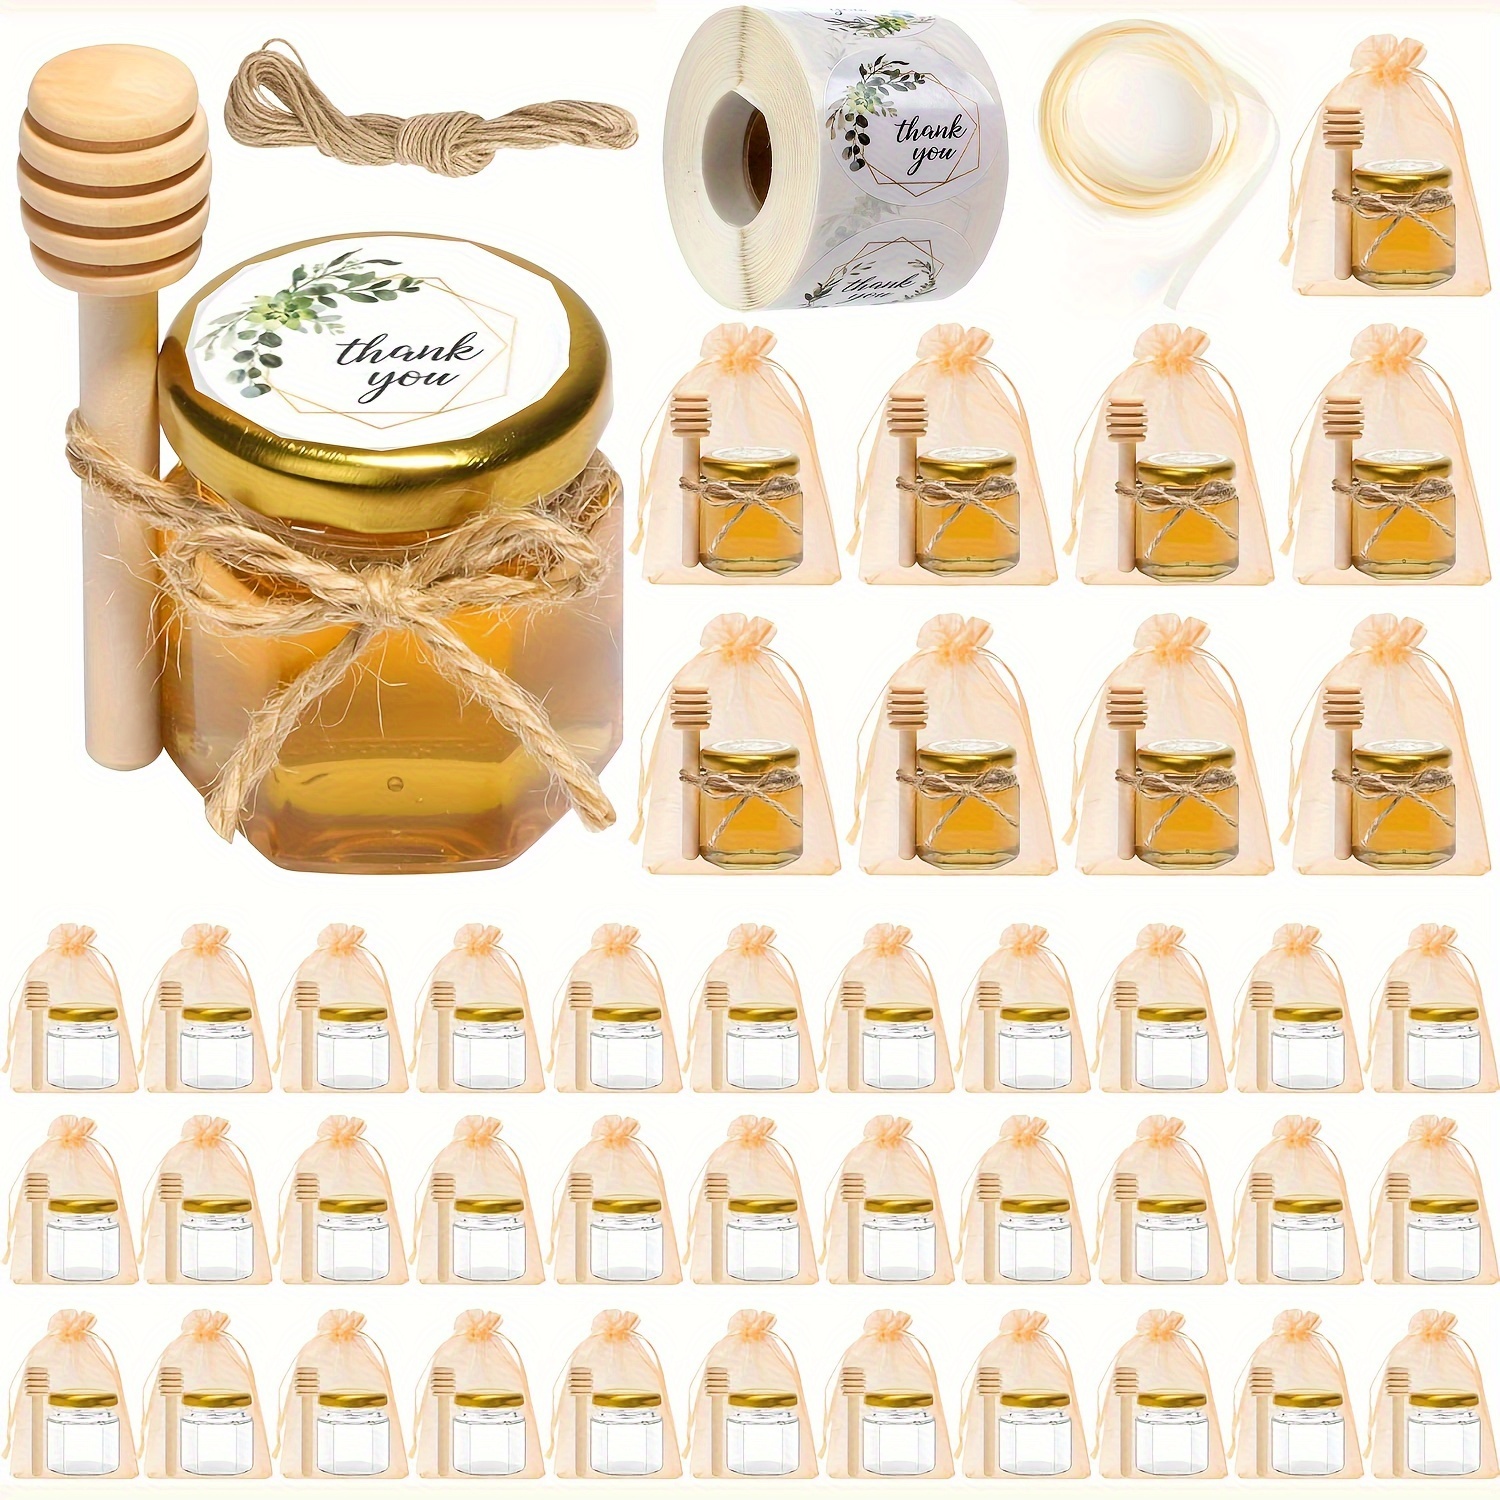 

20sets, Mini Honey Jar With Beidou, Small Honey Glass Jar With Golden Lid, Loose Small Hexagonal Honey Jar For Bridal Shower, Wedding And Party Gifts, Accompanied By Hand Gifts